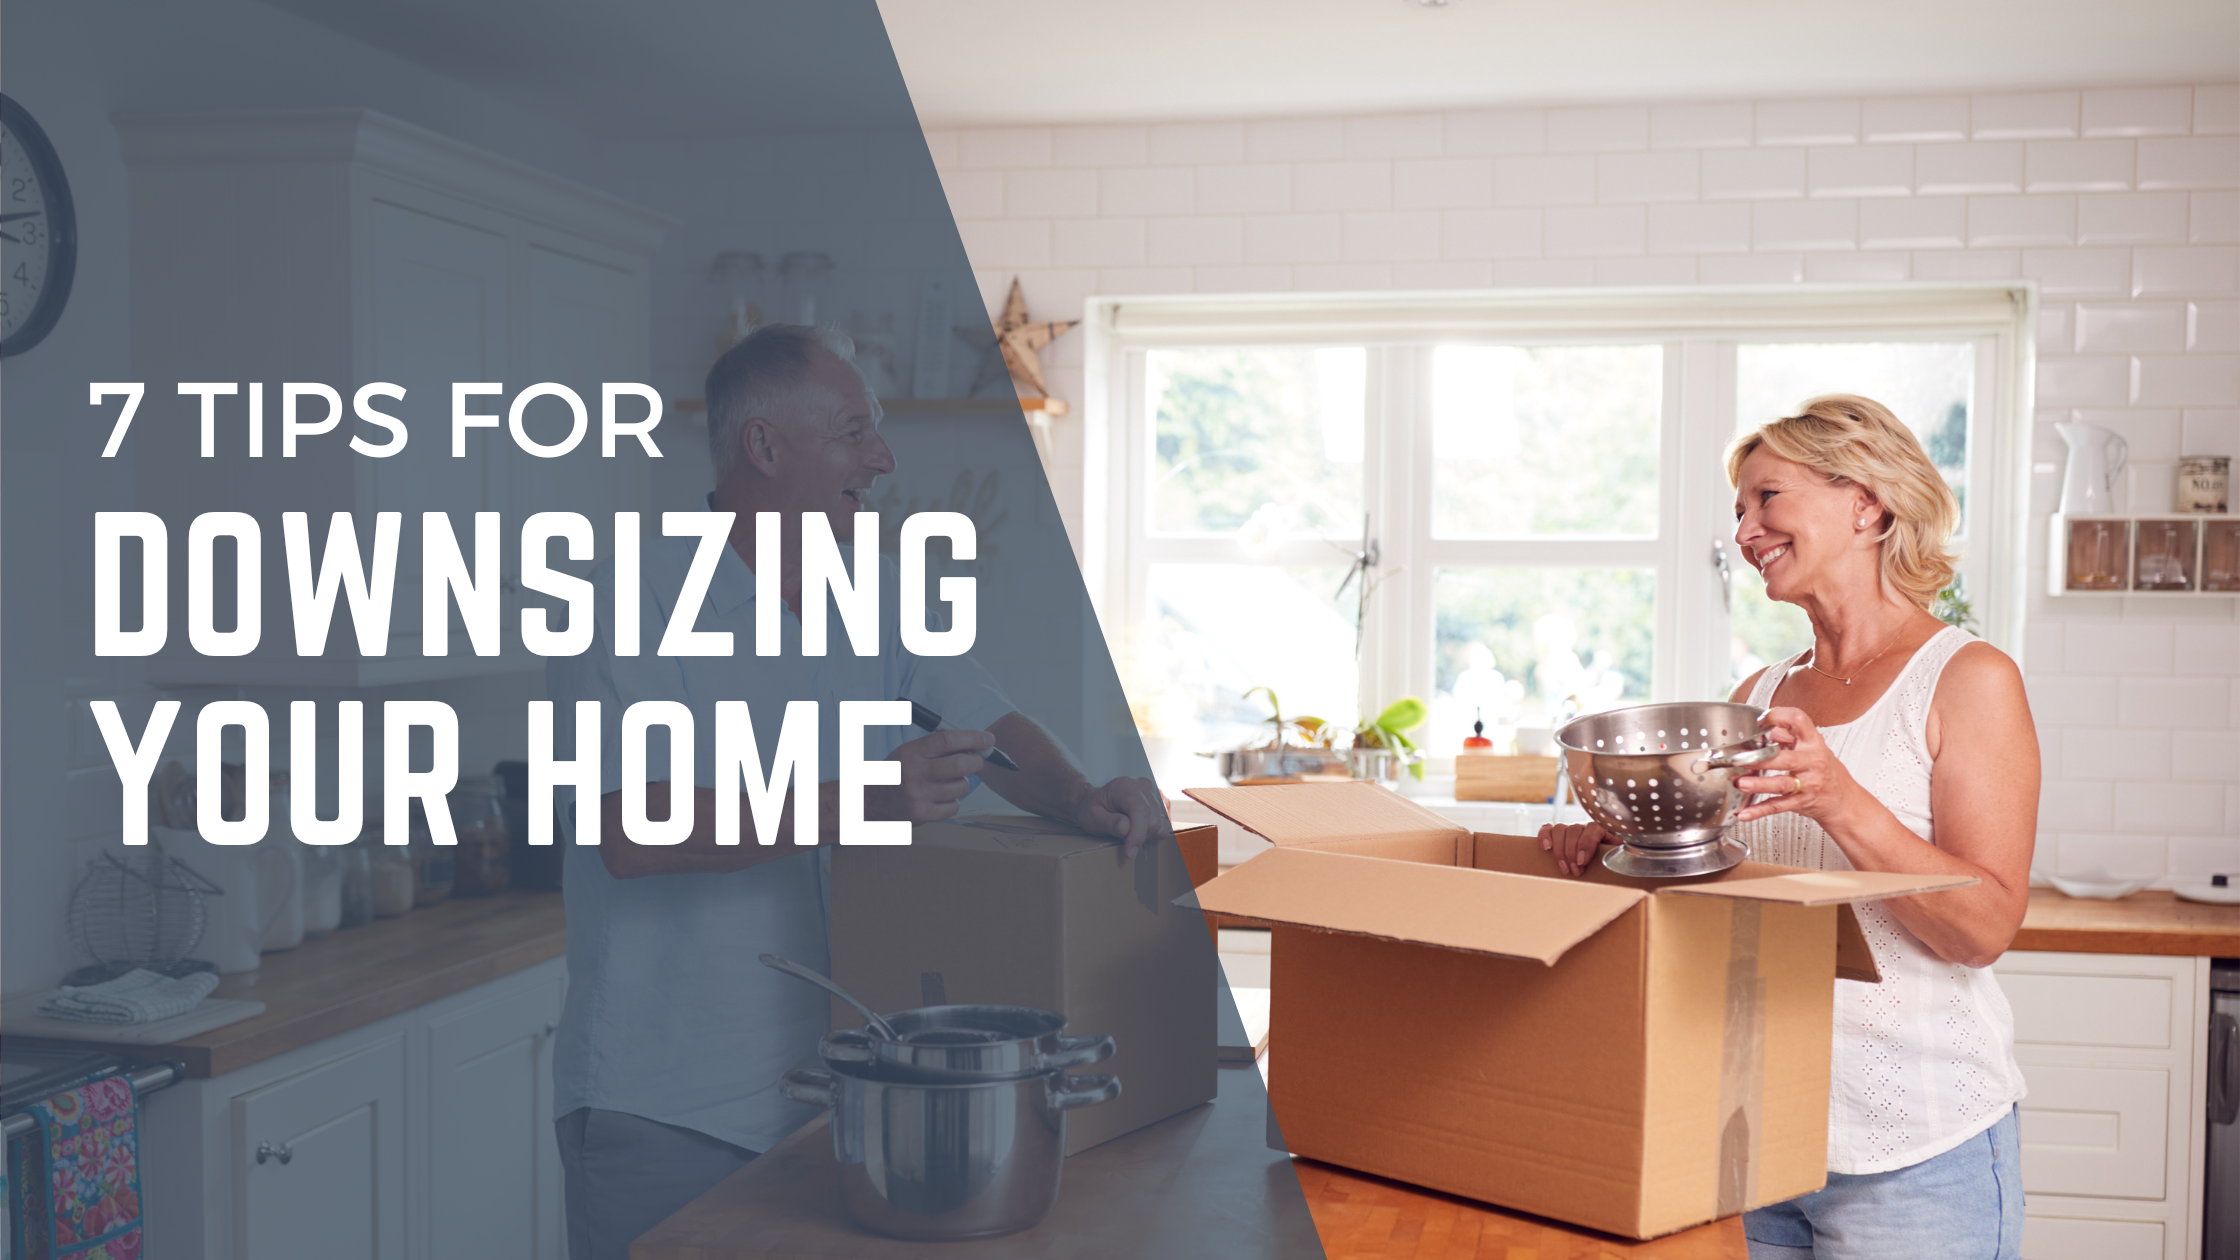 Tips for Downsizing: What You Should Look For